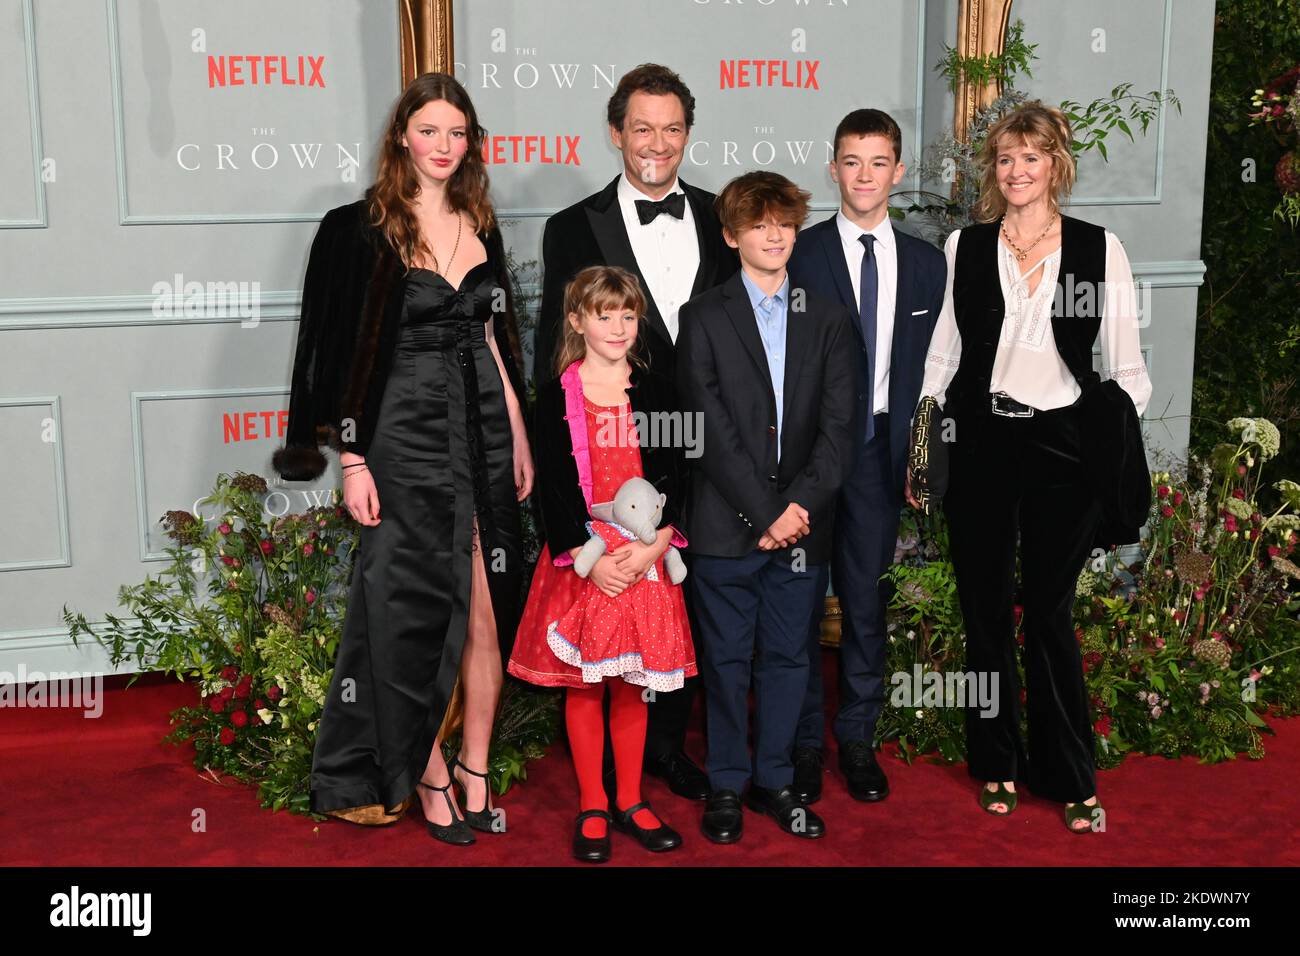 London, UK - 8th November 2022 Dominic West and his wife Catherine FitzGerald and their four children Senan, Dora, Francis and Cristabel at Netflix World Premiere for The Crown Season 5 at Theatre Royal, Drury Lane, London    Credit: Nils Jorgensen/Alamy Live News Stock Photo